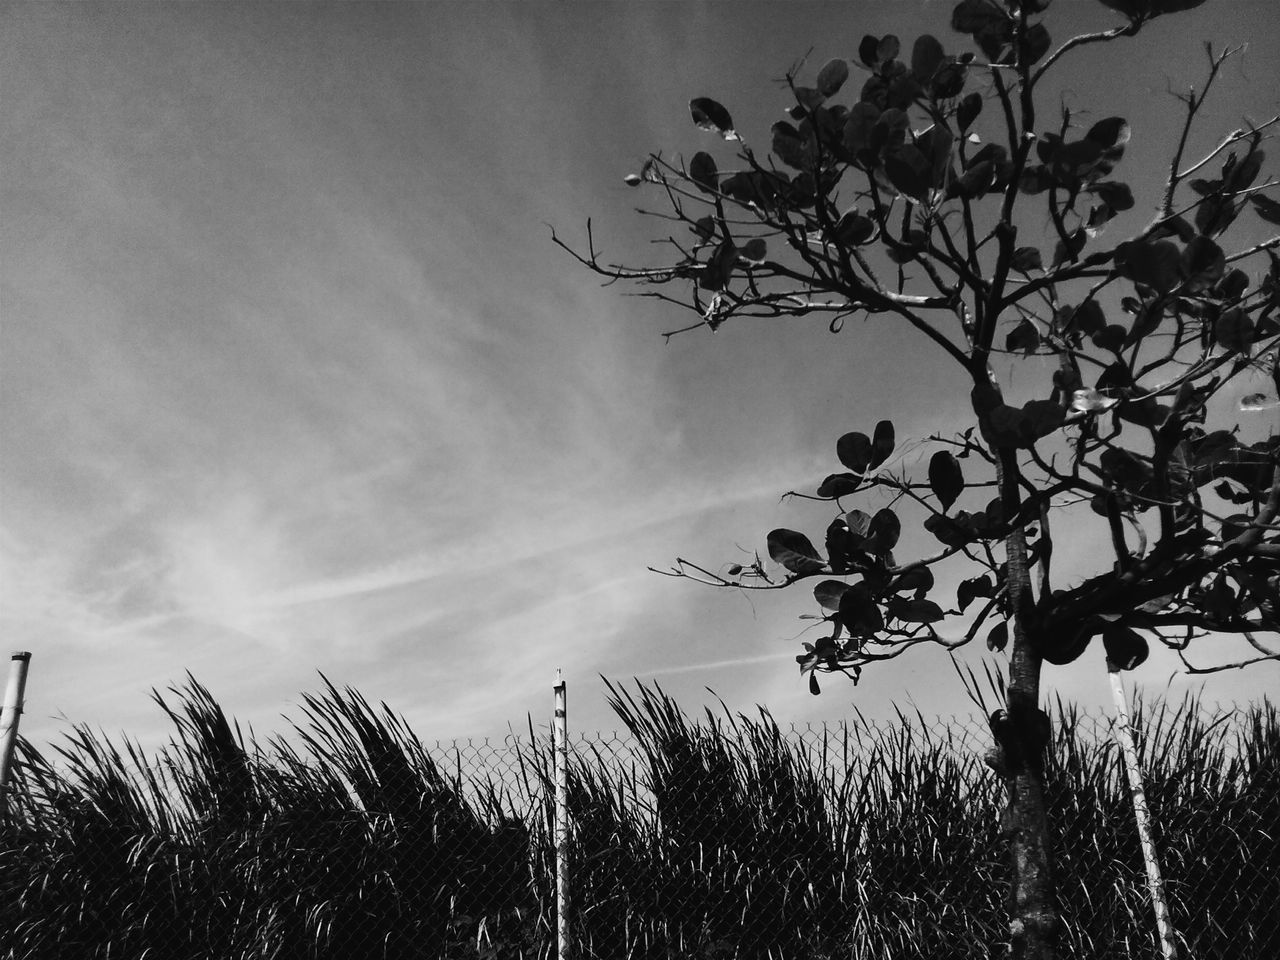 growth, tree, sky, low angle view, tranquility, nature, branch, beauty in nature, plant, tranquil scene, scenics, silhouette, cloud - sky, outdoors, growing, field, day, no people, leaf, idyllic